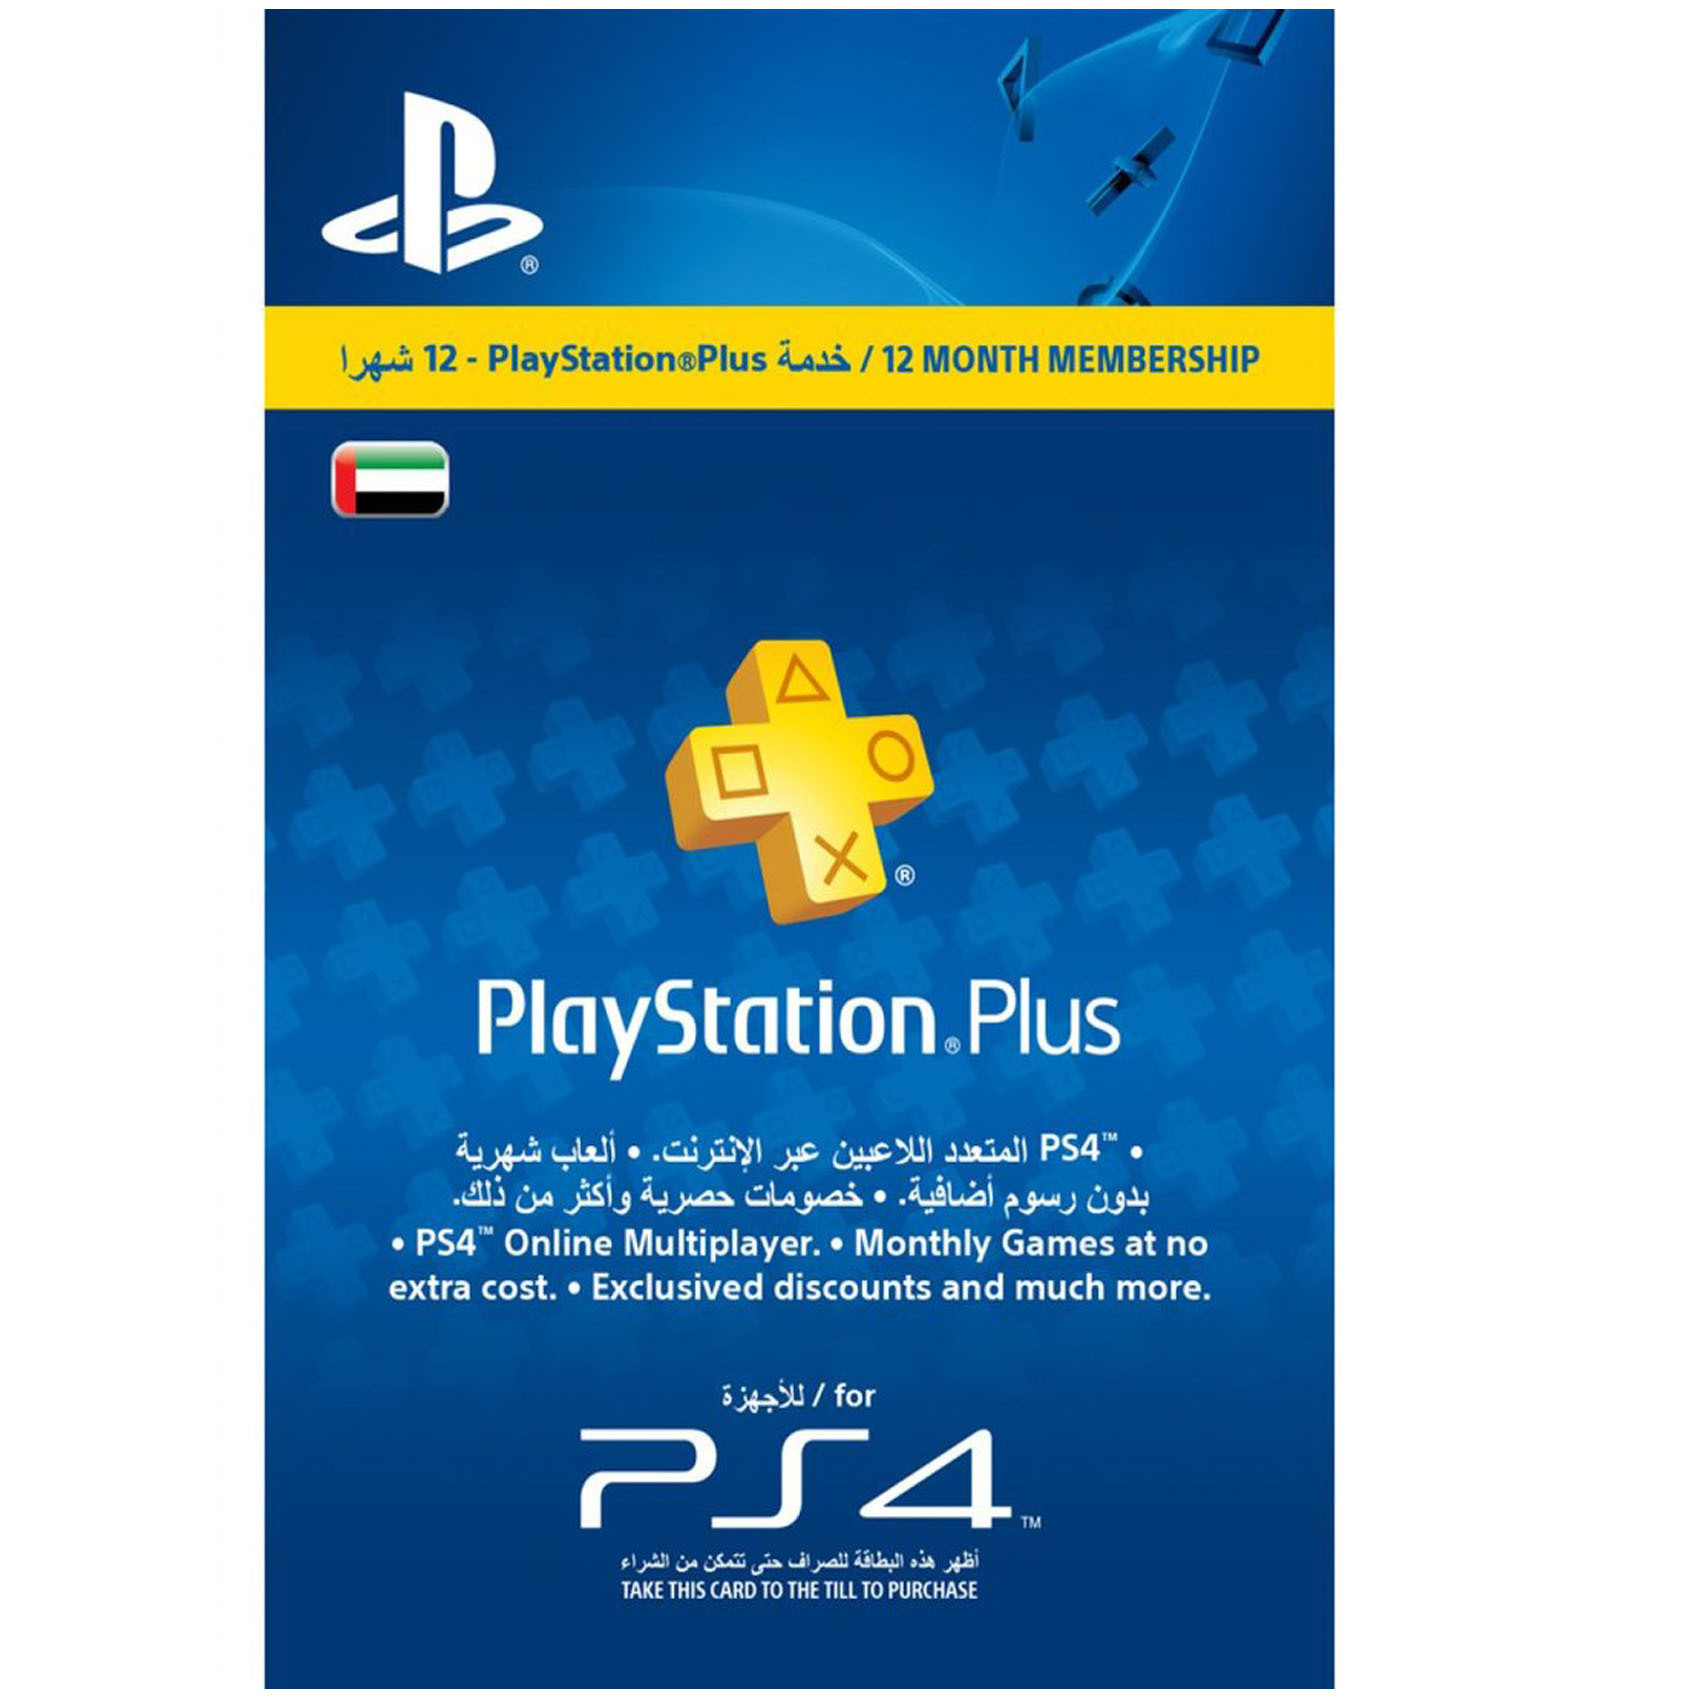 playstation plus 12 month cost